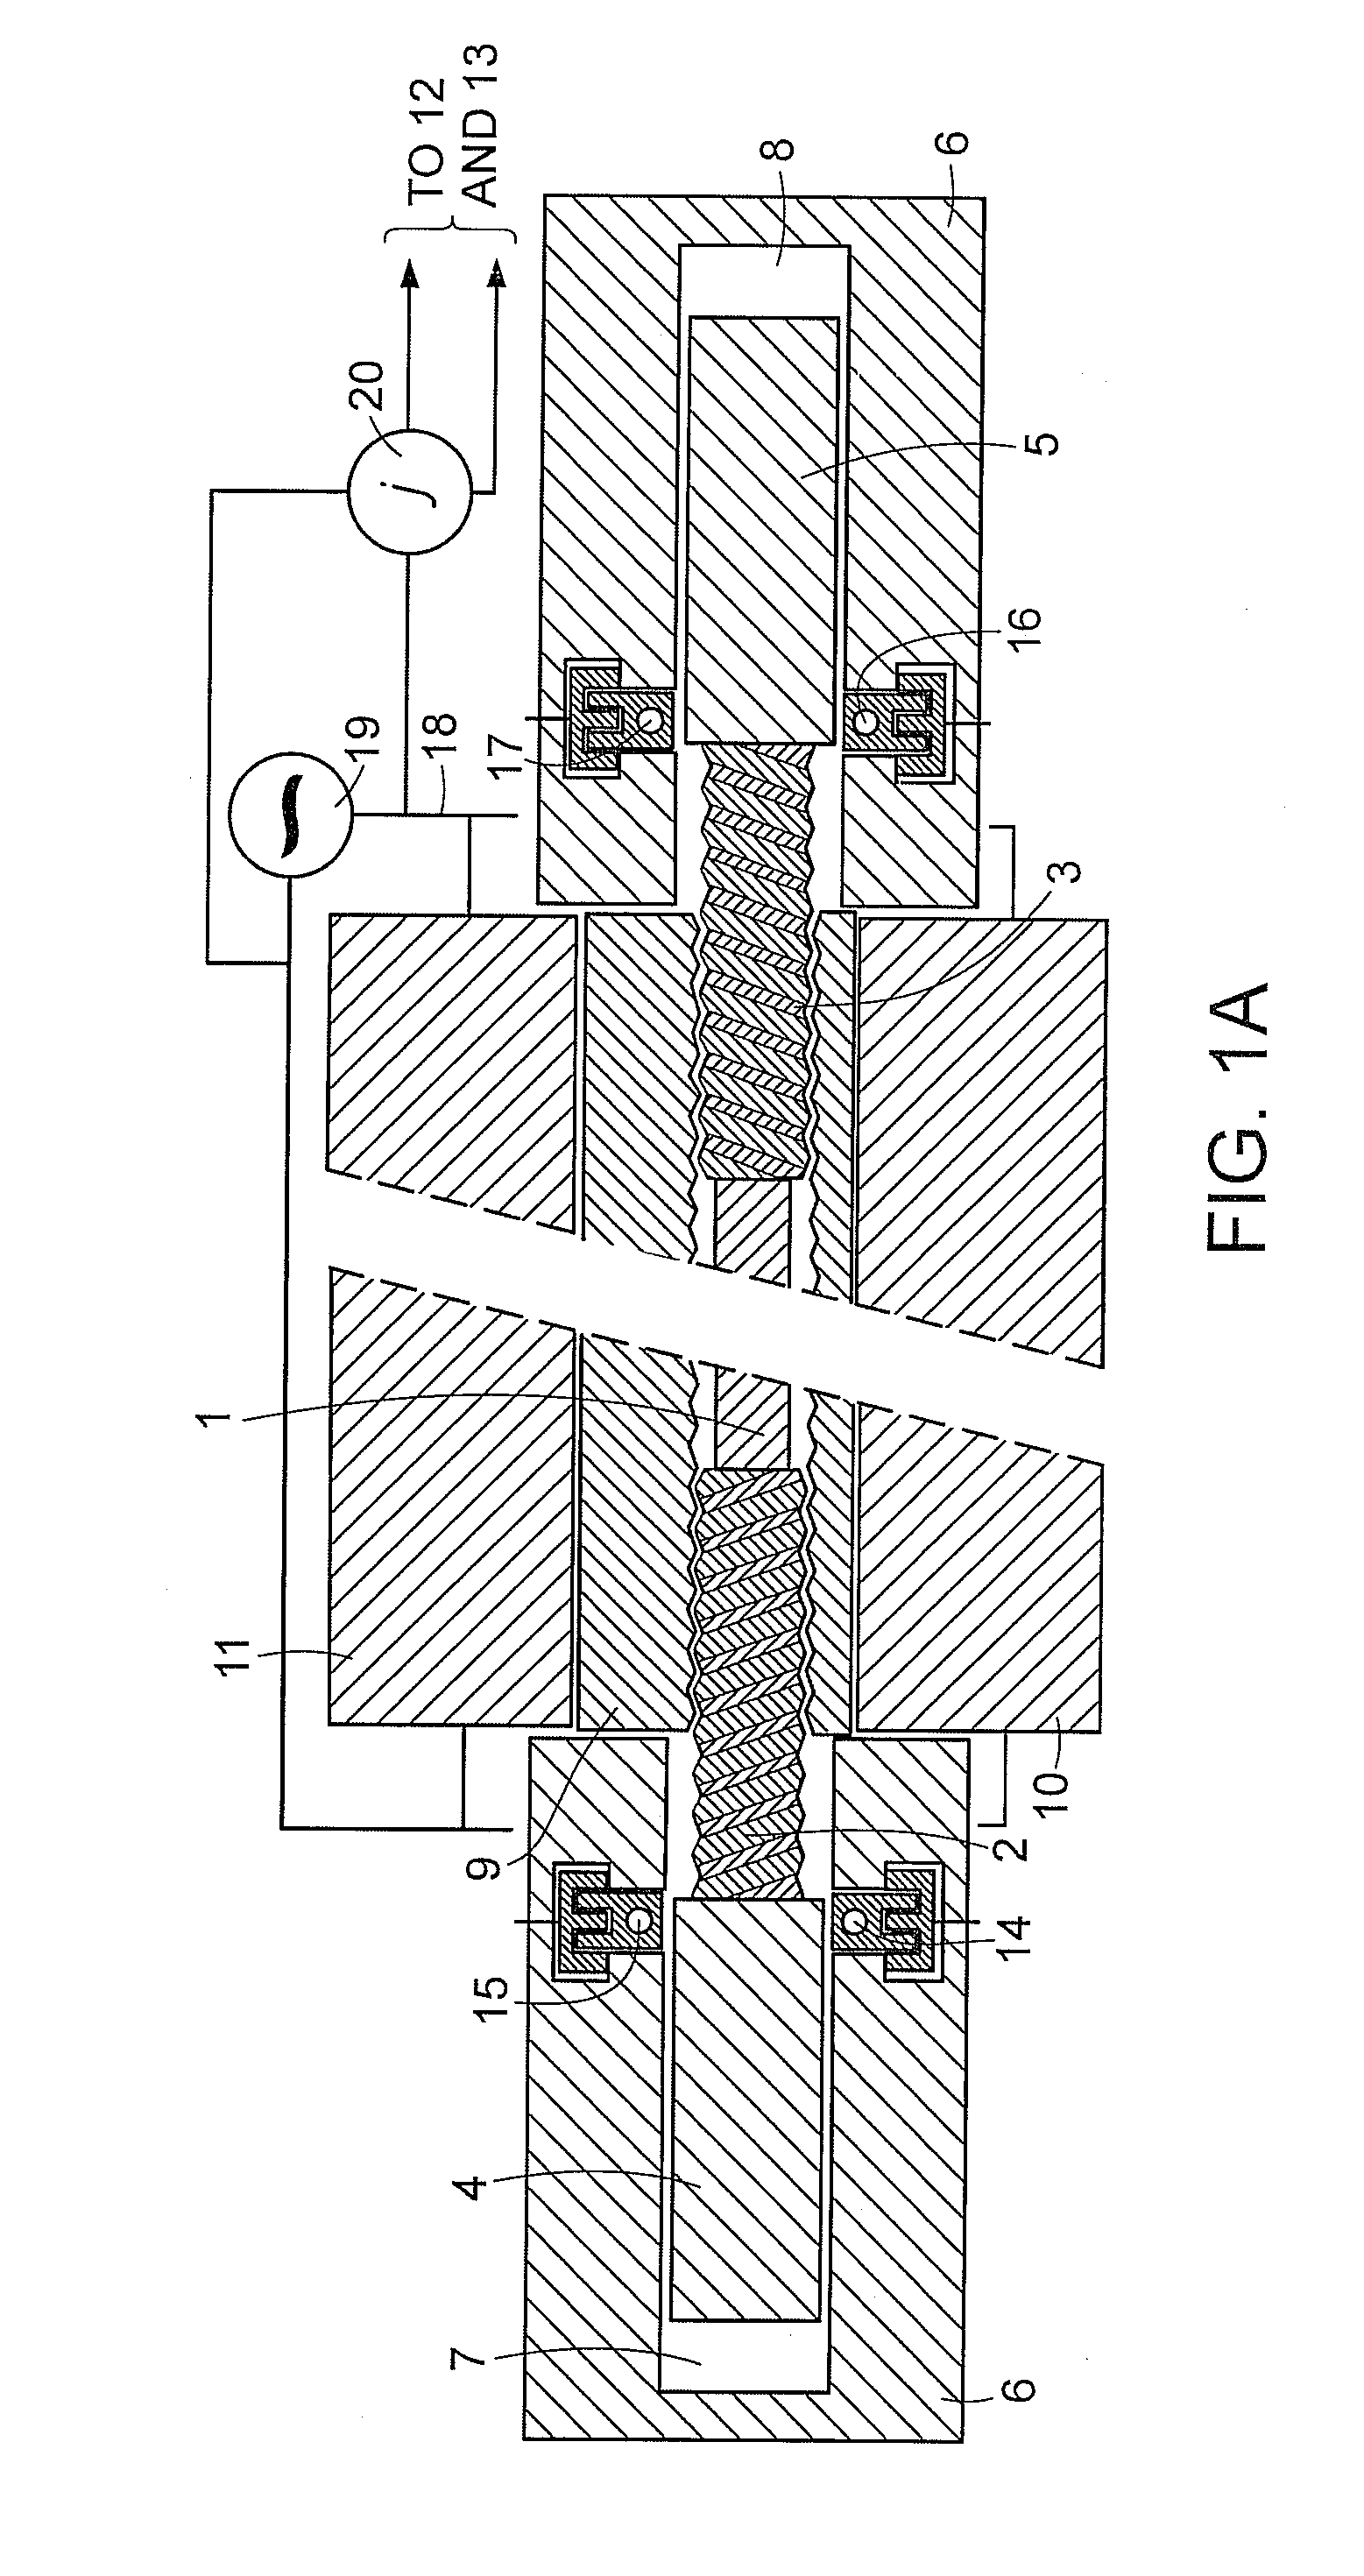 Devices for storing energy in the mechanical deformation of nanotube molecules and recovering the energy from mechanically deformed nanotube molecules